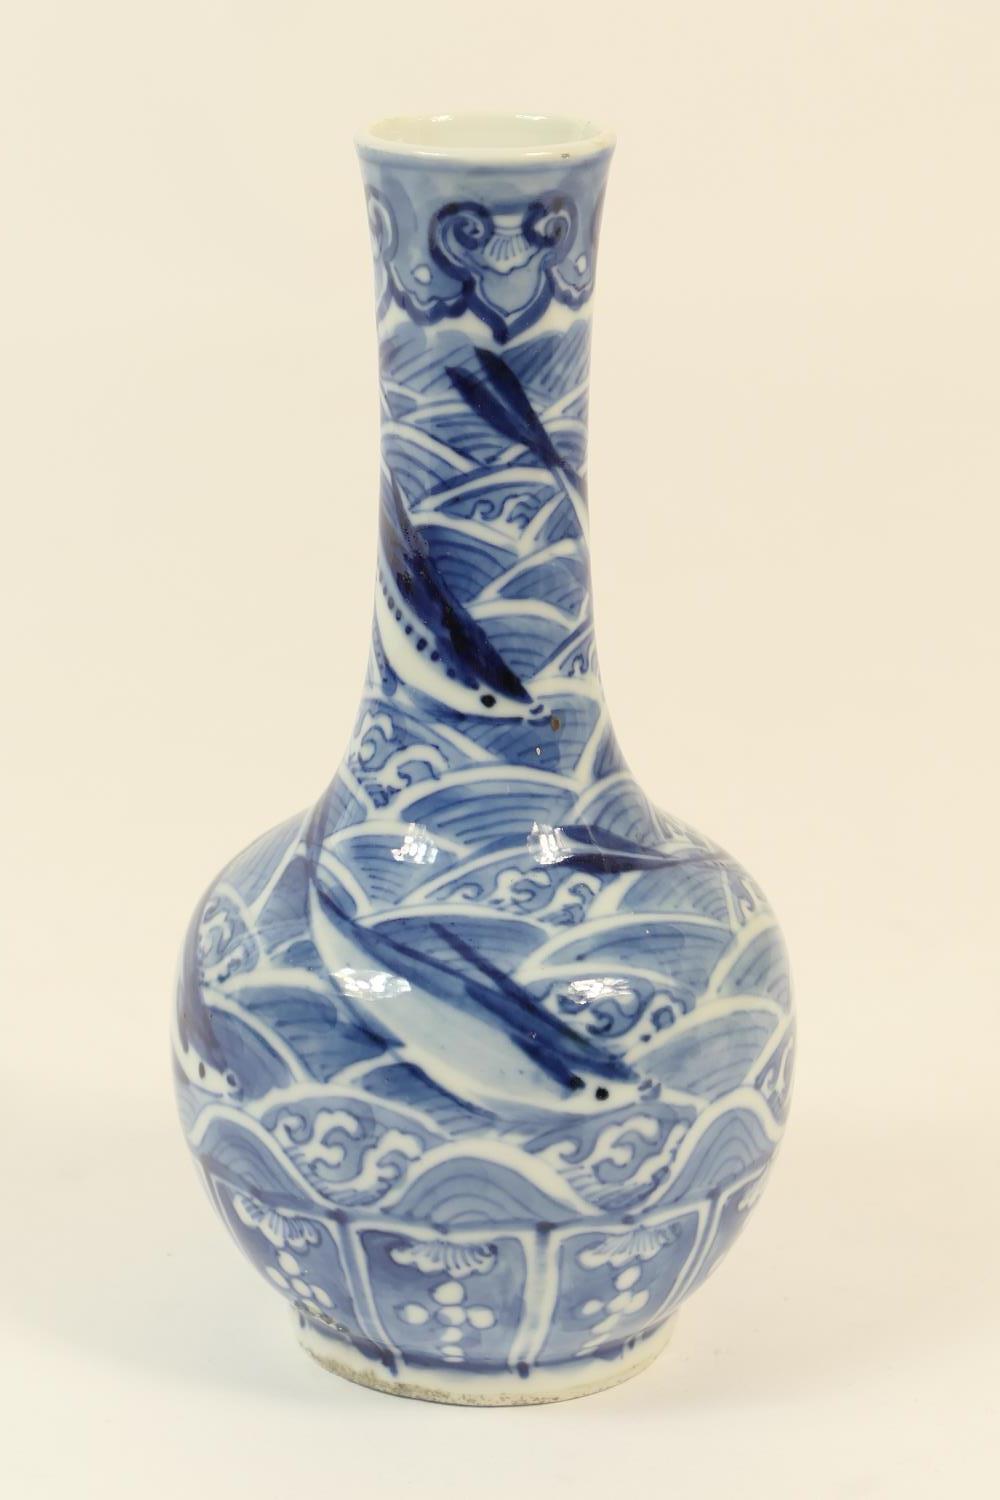 Chinese blue and white bottle vase, late 19th Century or early 20th Century, decorated with flying